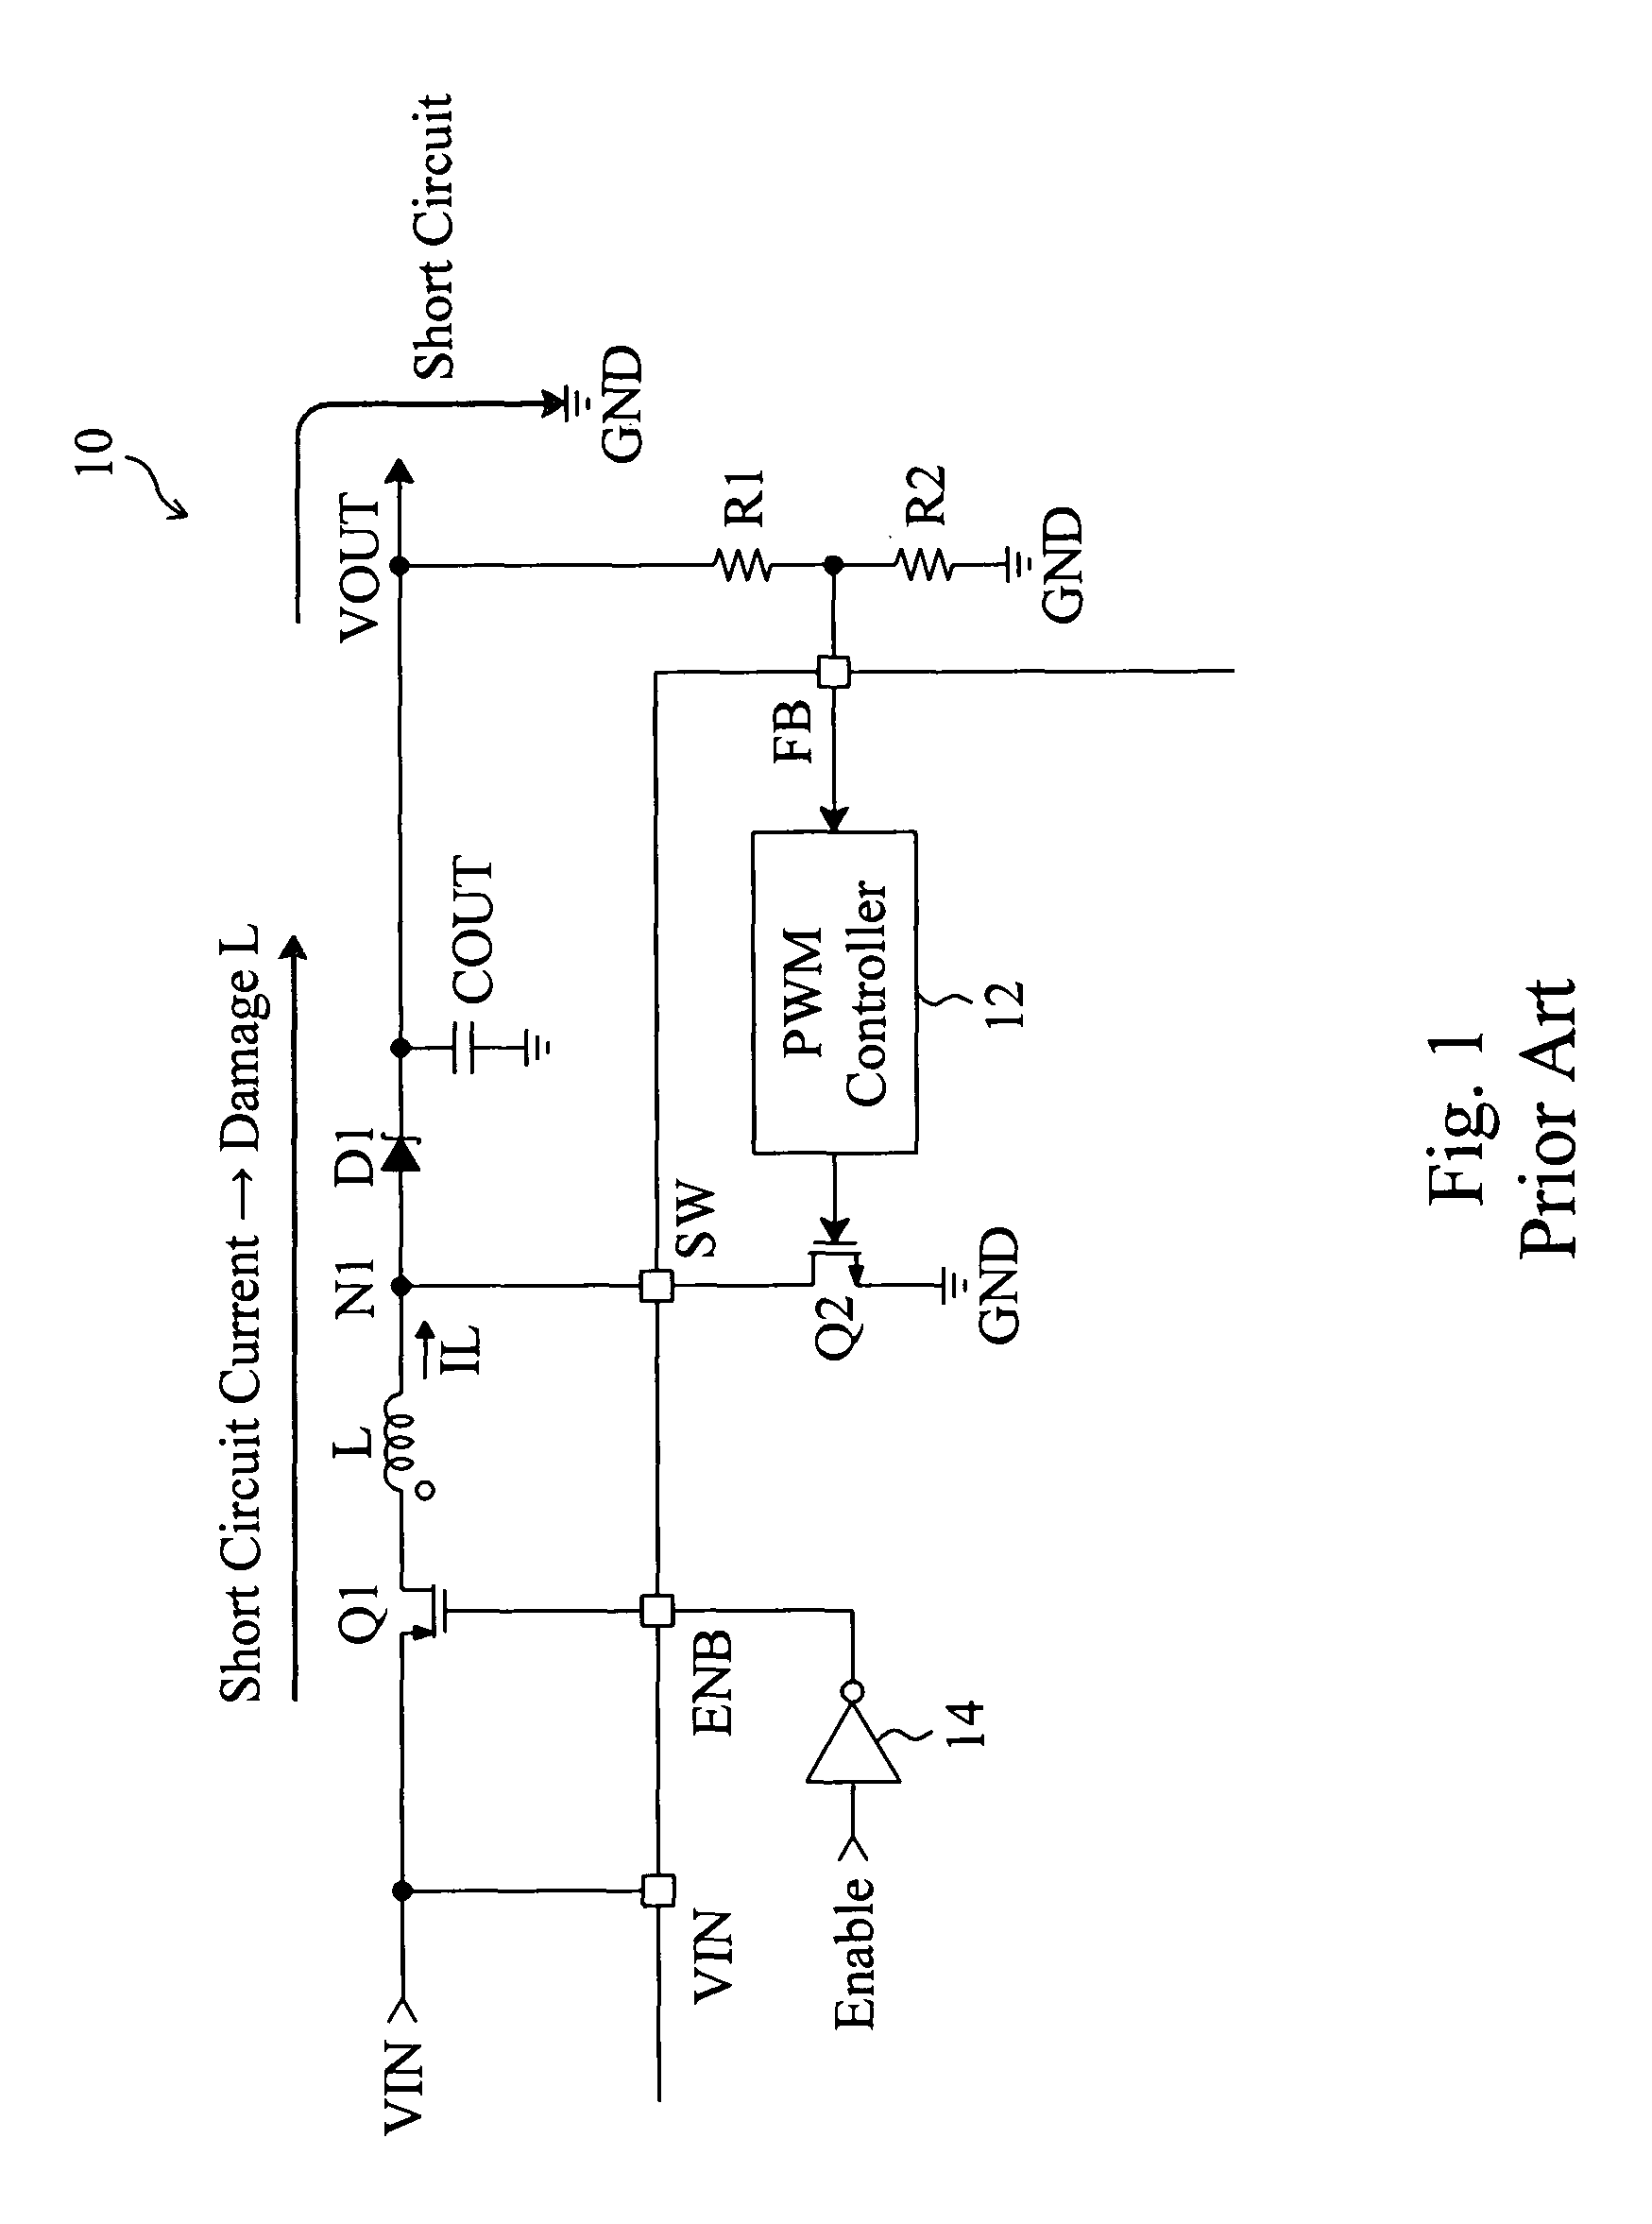 Short circuit and open circuit protection for a boost converter